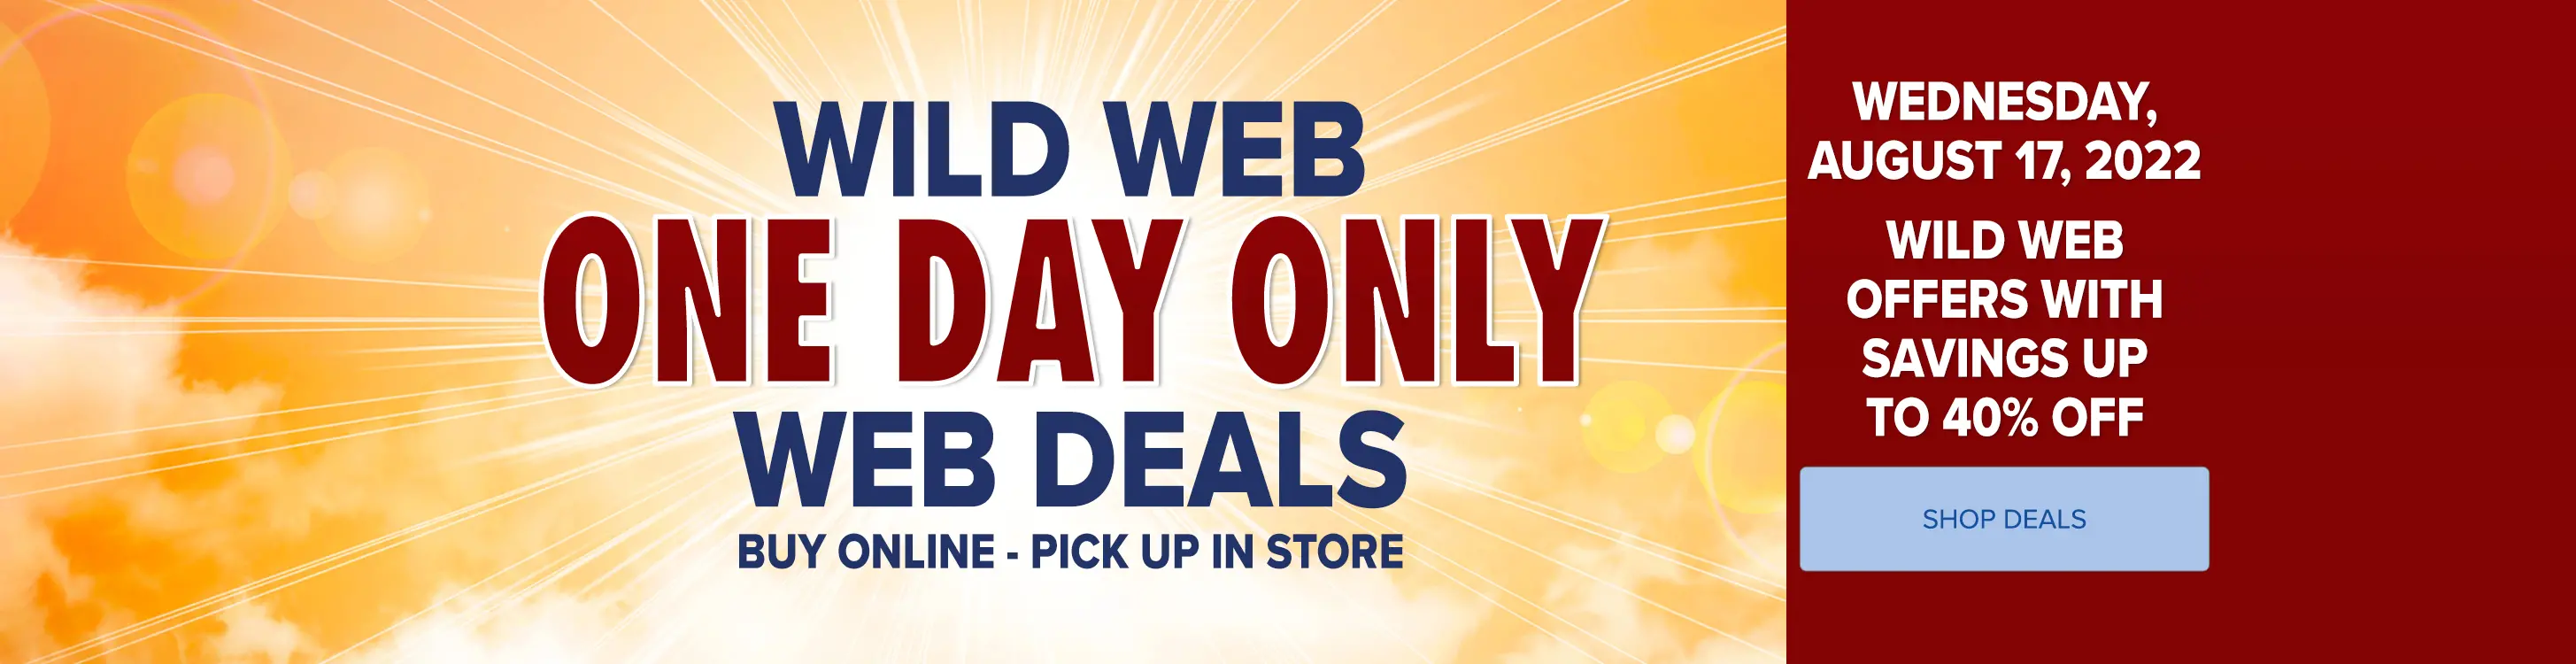 One Day Only! With Savings up to 40% Off!